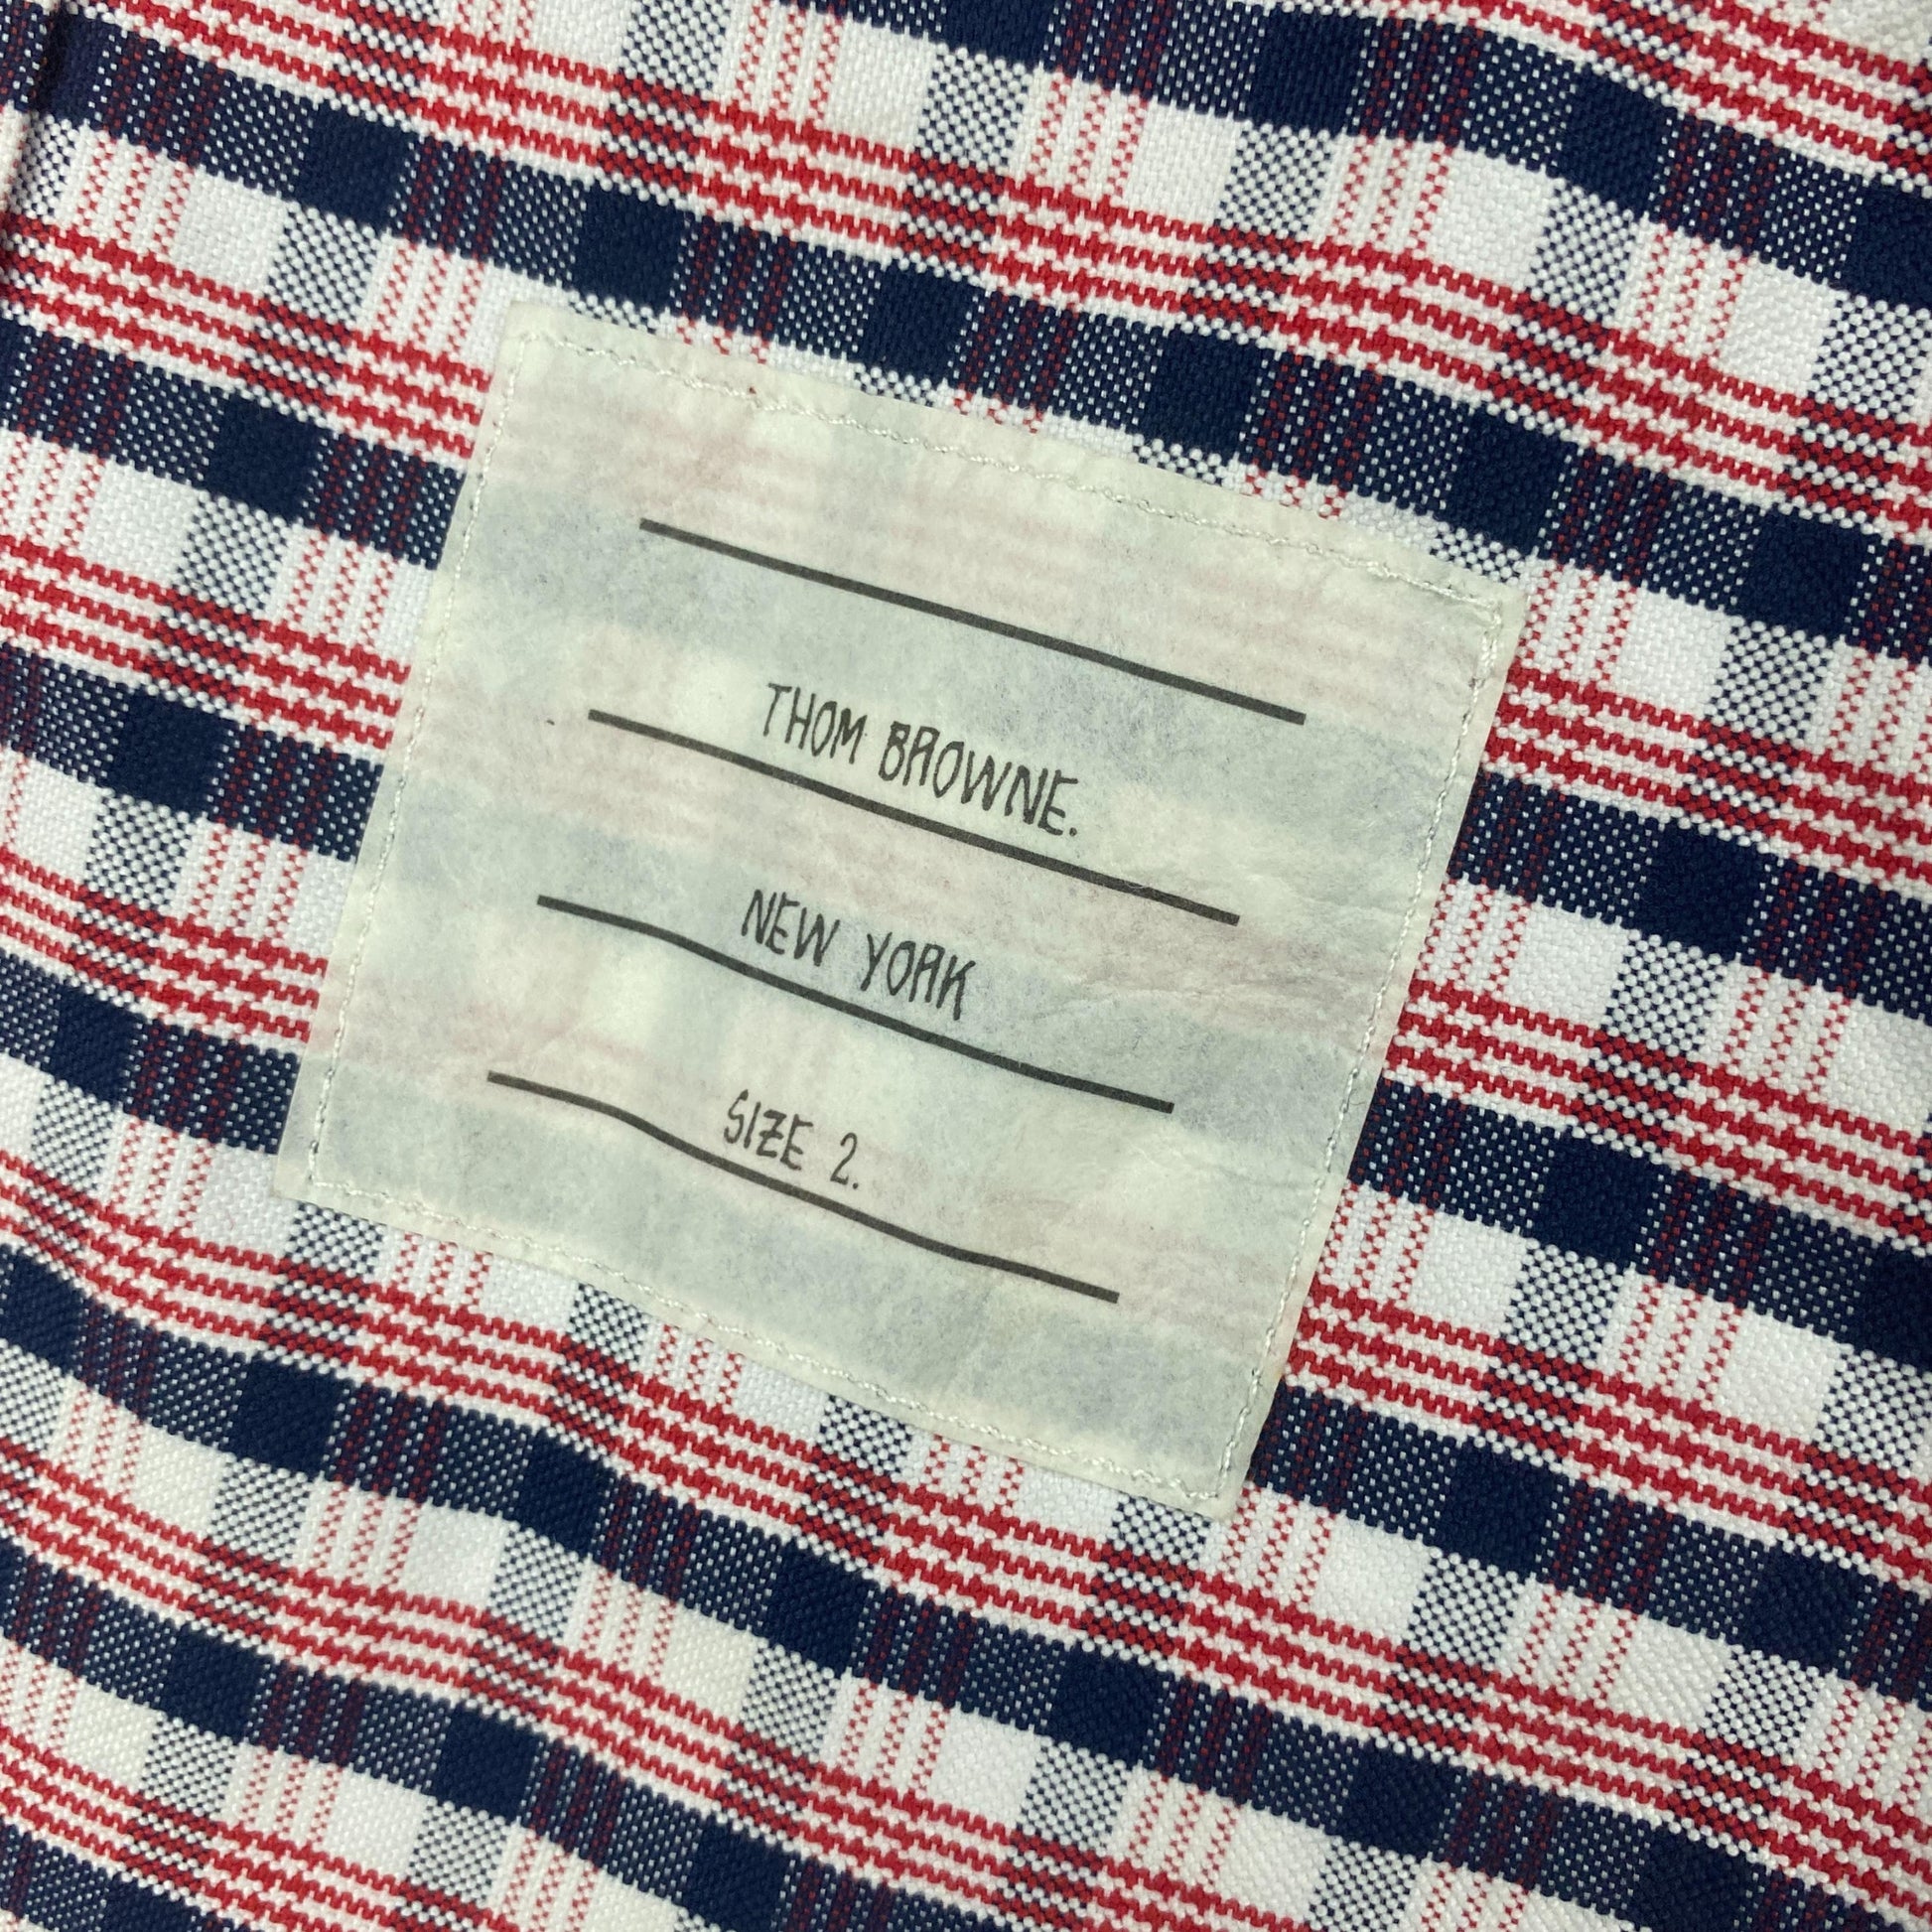 THOM BROWNE CHECK SHIRT (S) - Known Source